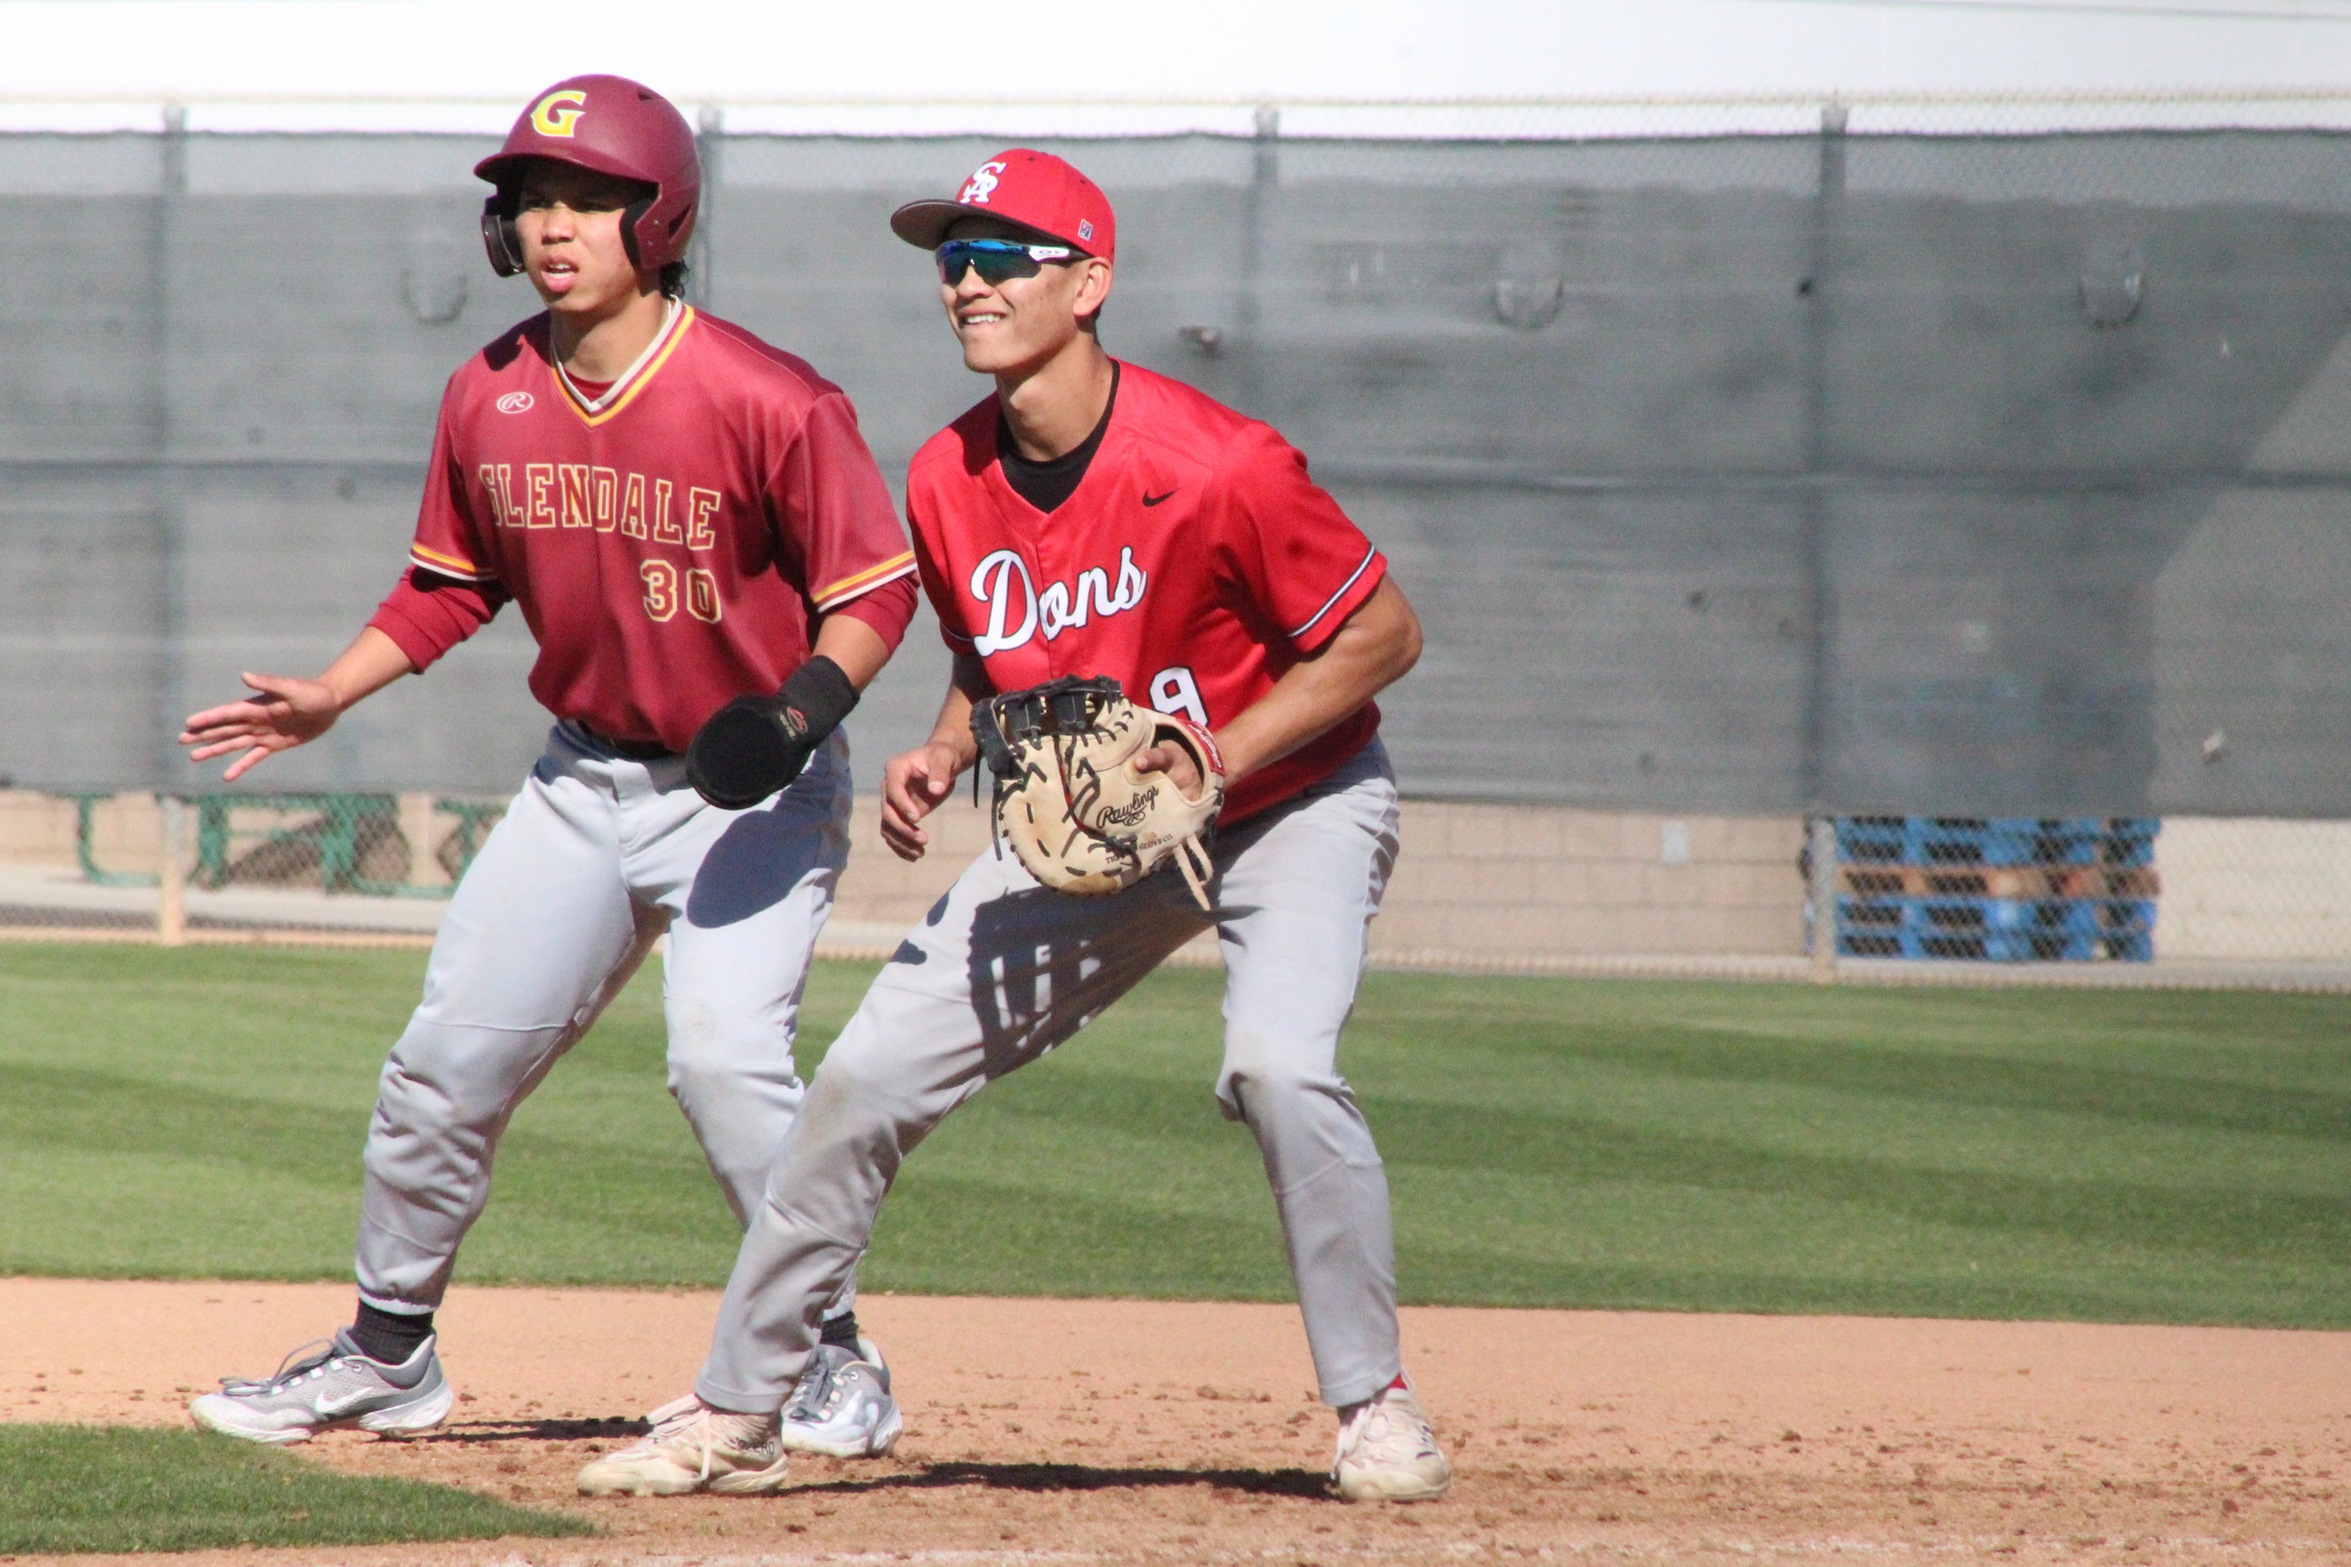 Dons Fall to Glendale, 8-4